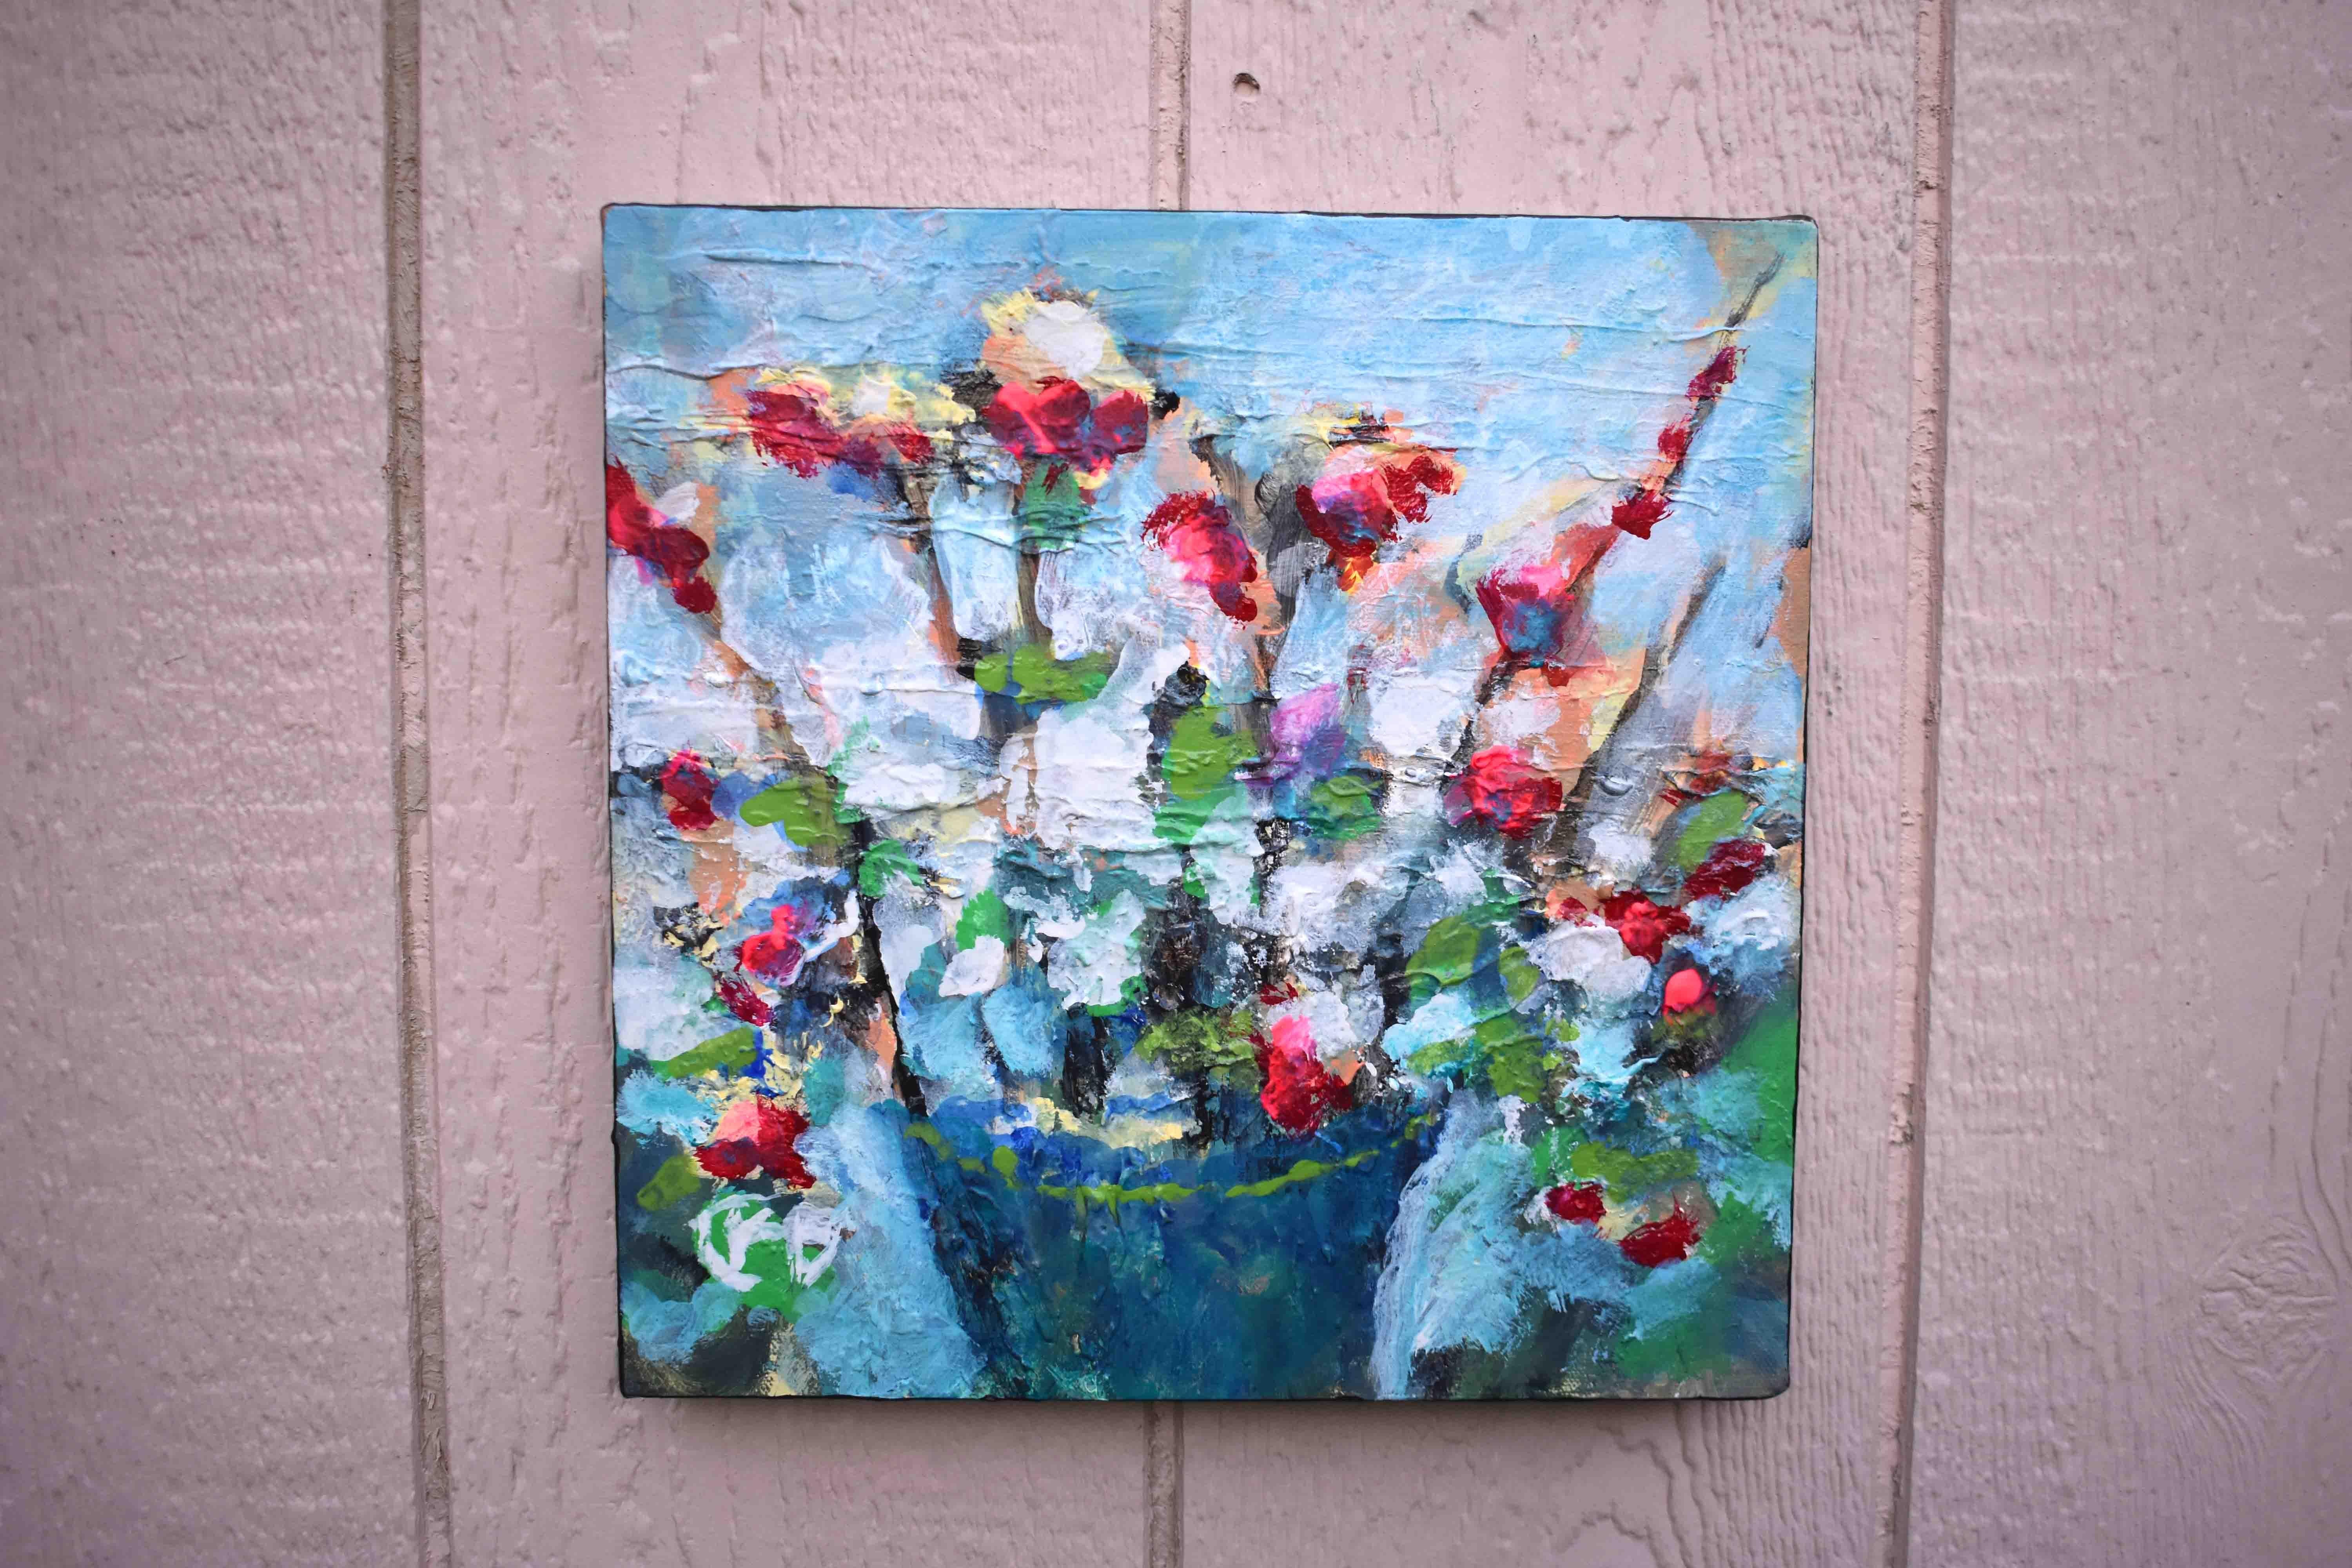 <p>Artist Comments<br>Artist Kip Decker presents a lightly textured floral expression in a balance of bright and muted tones. He paints flourishing blossoms popping in vibrant red to contrast the softer shades. 